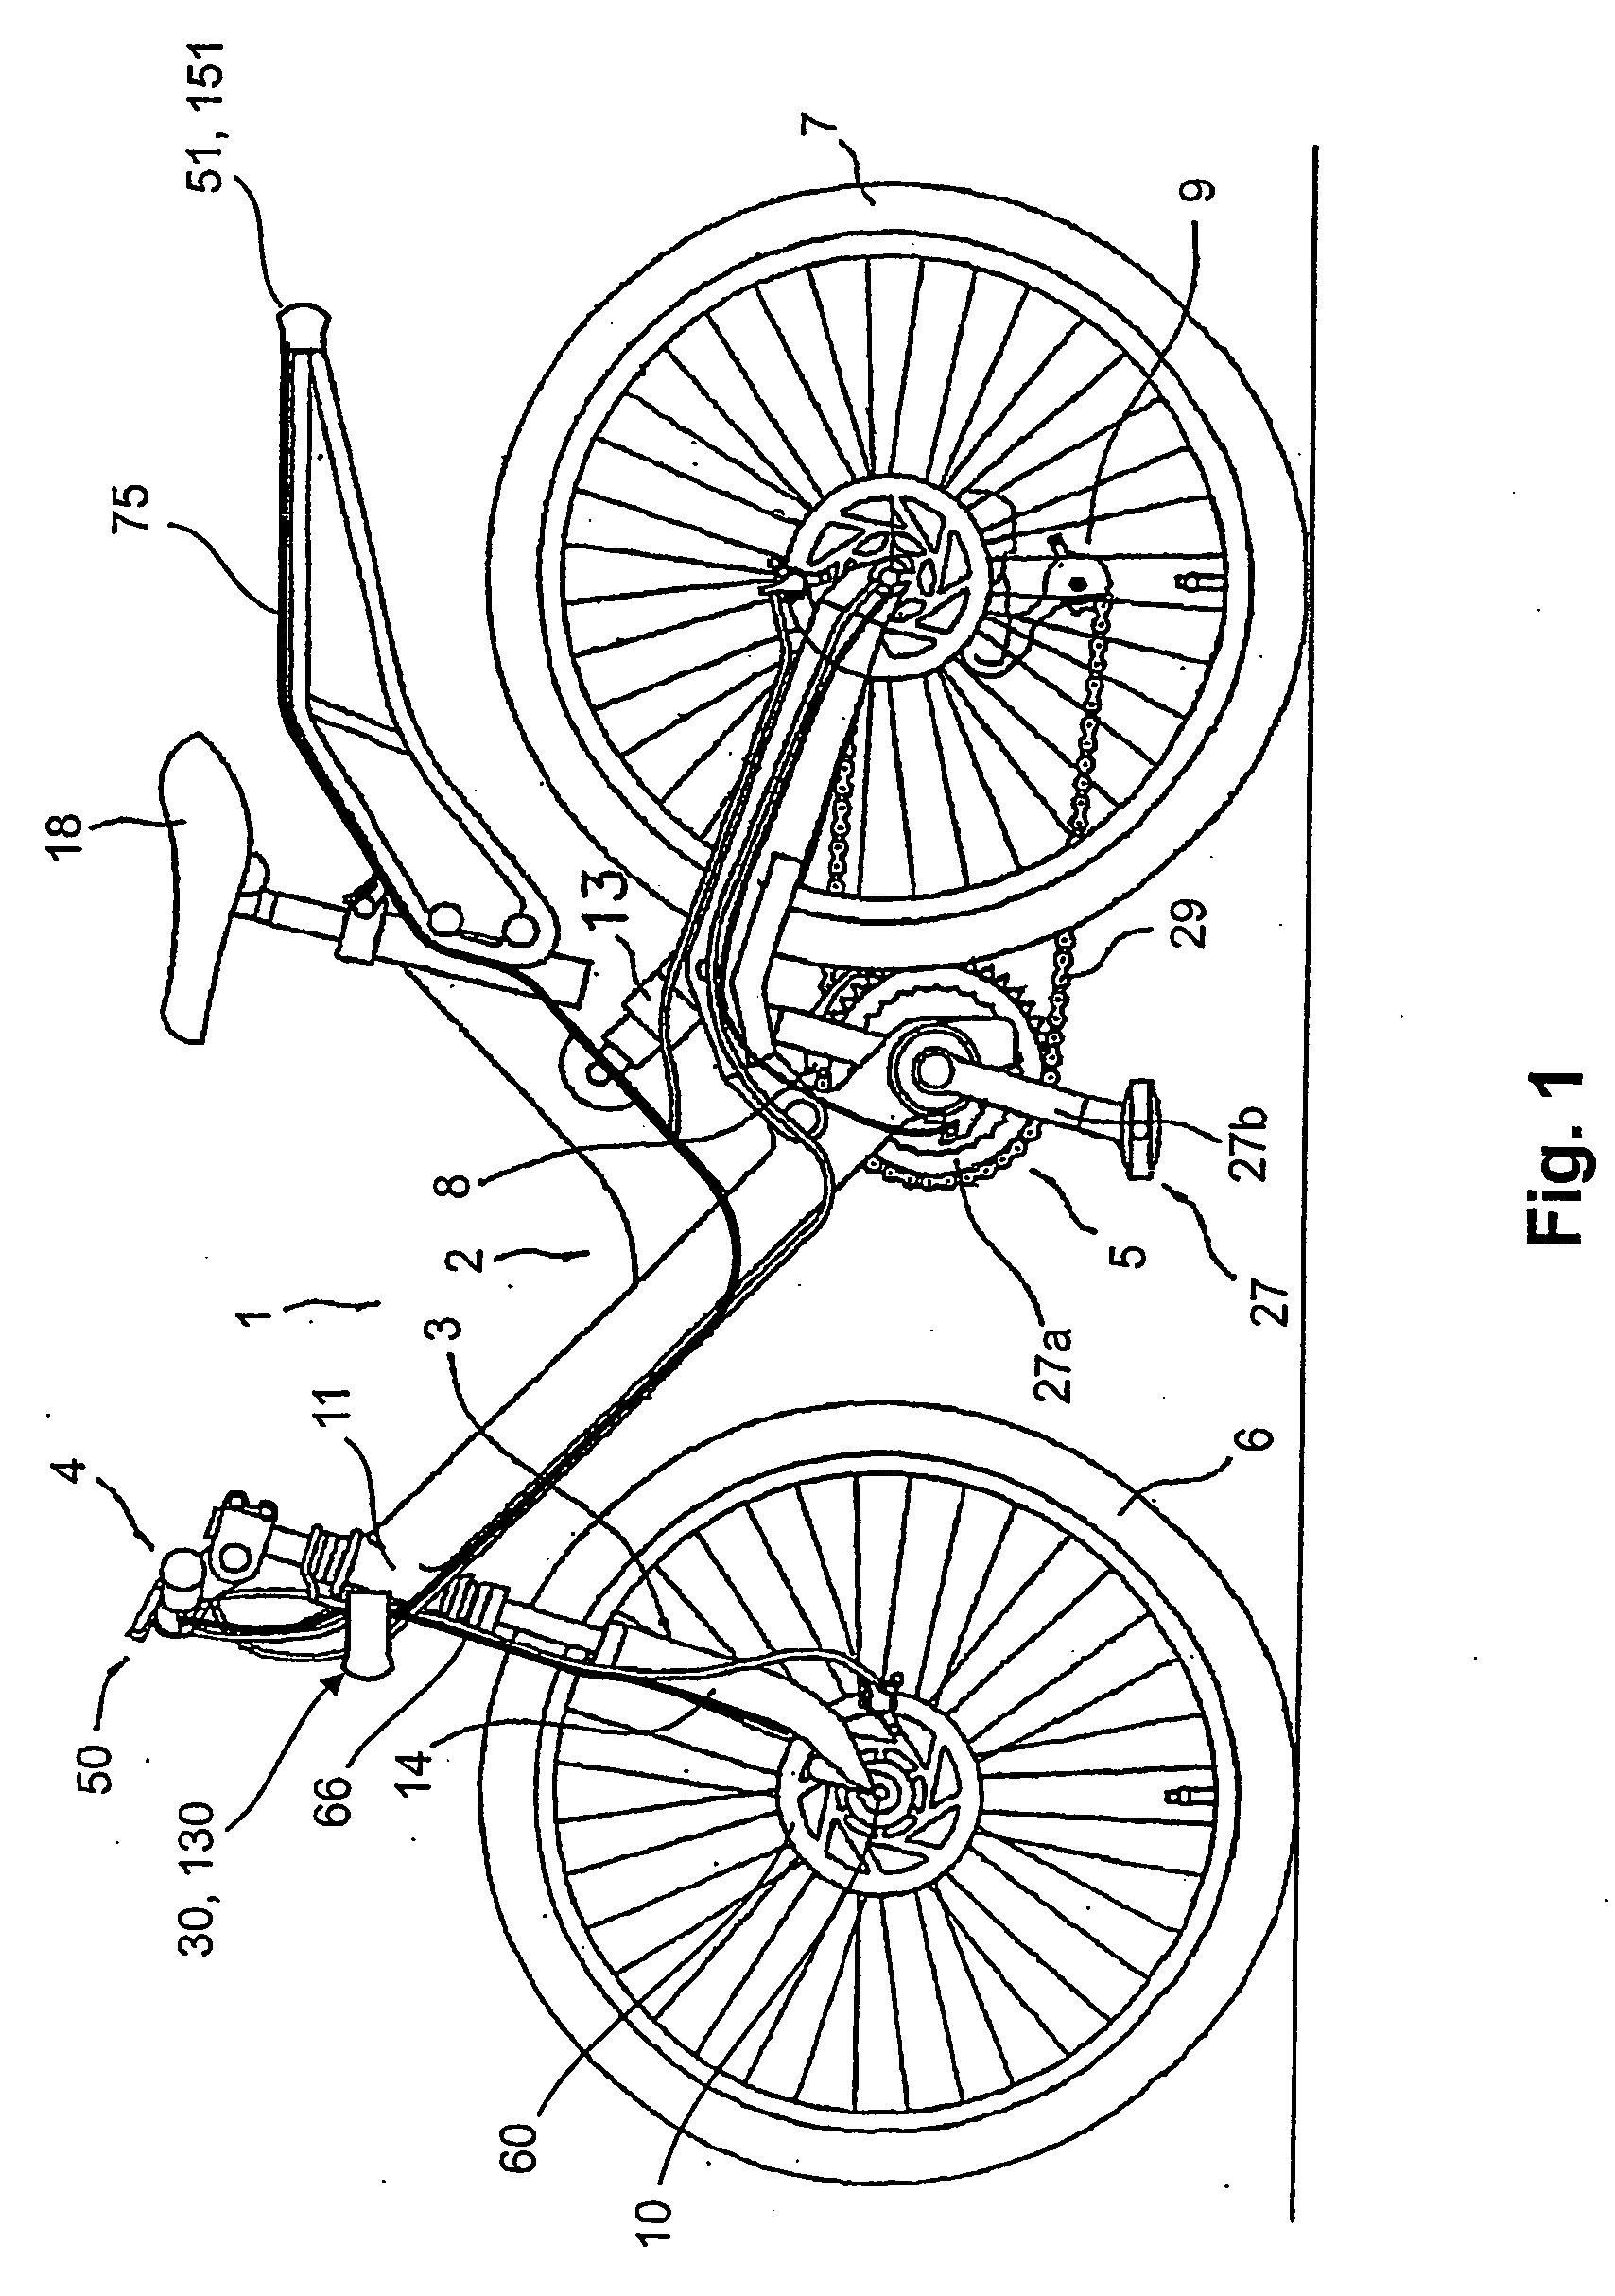 Bicycle light assembly with auxiliary output connector